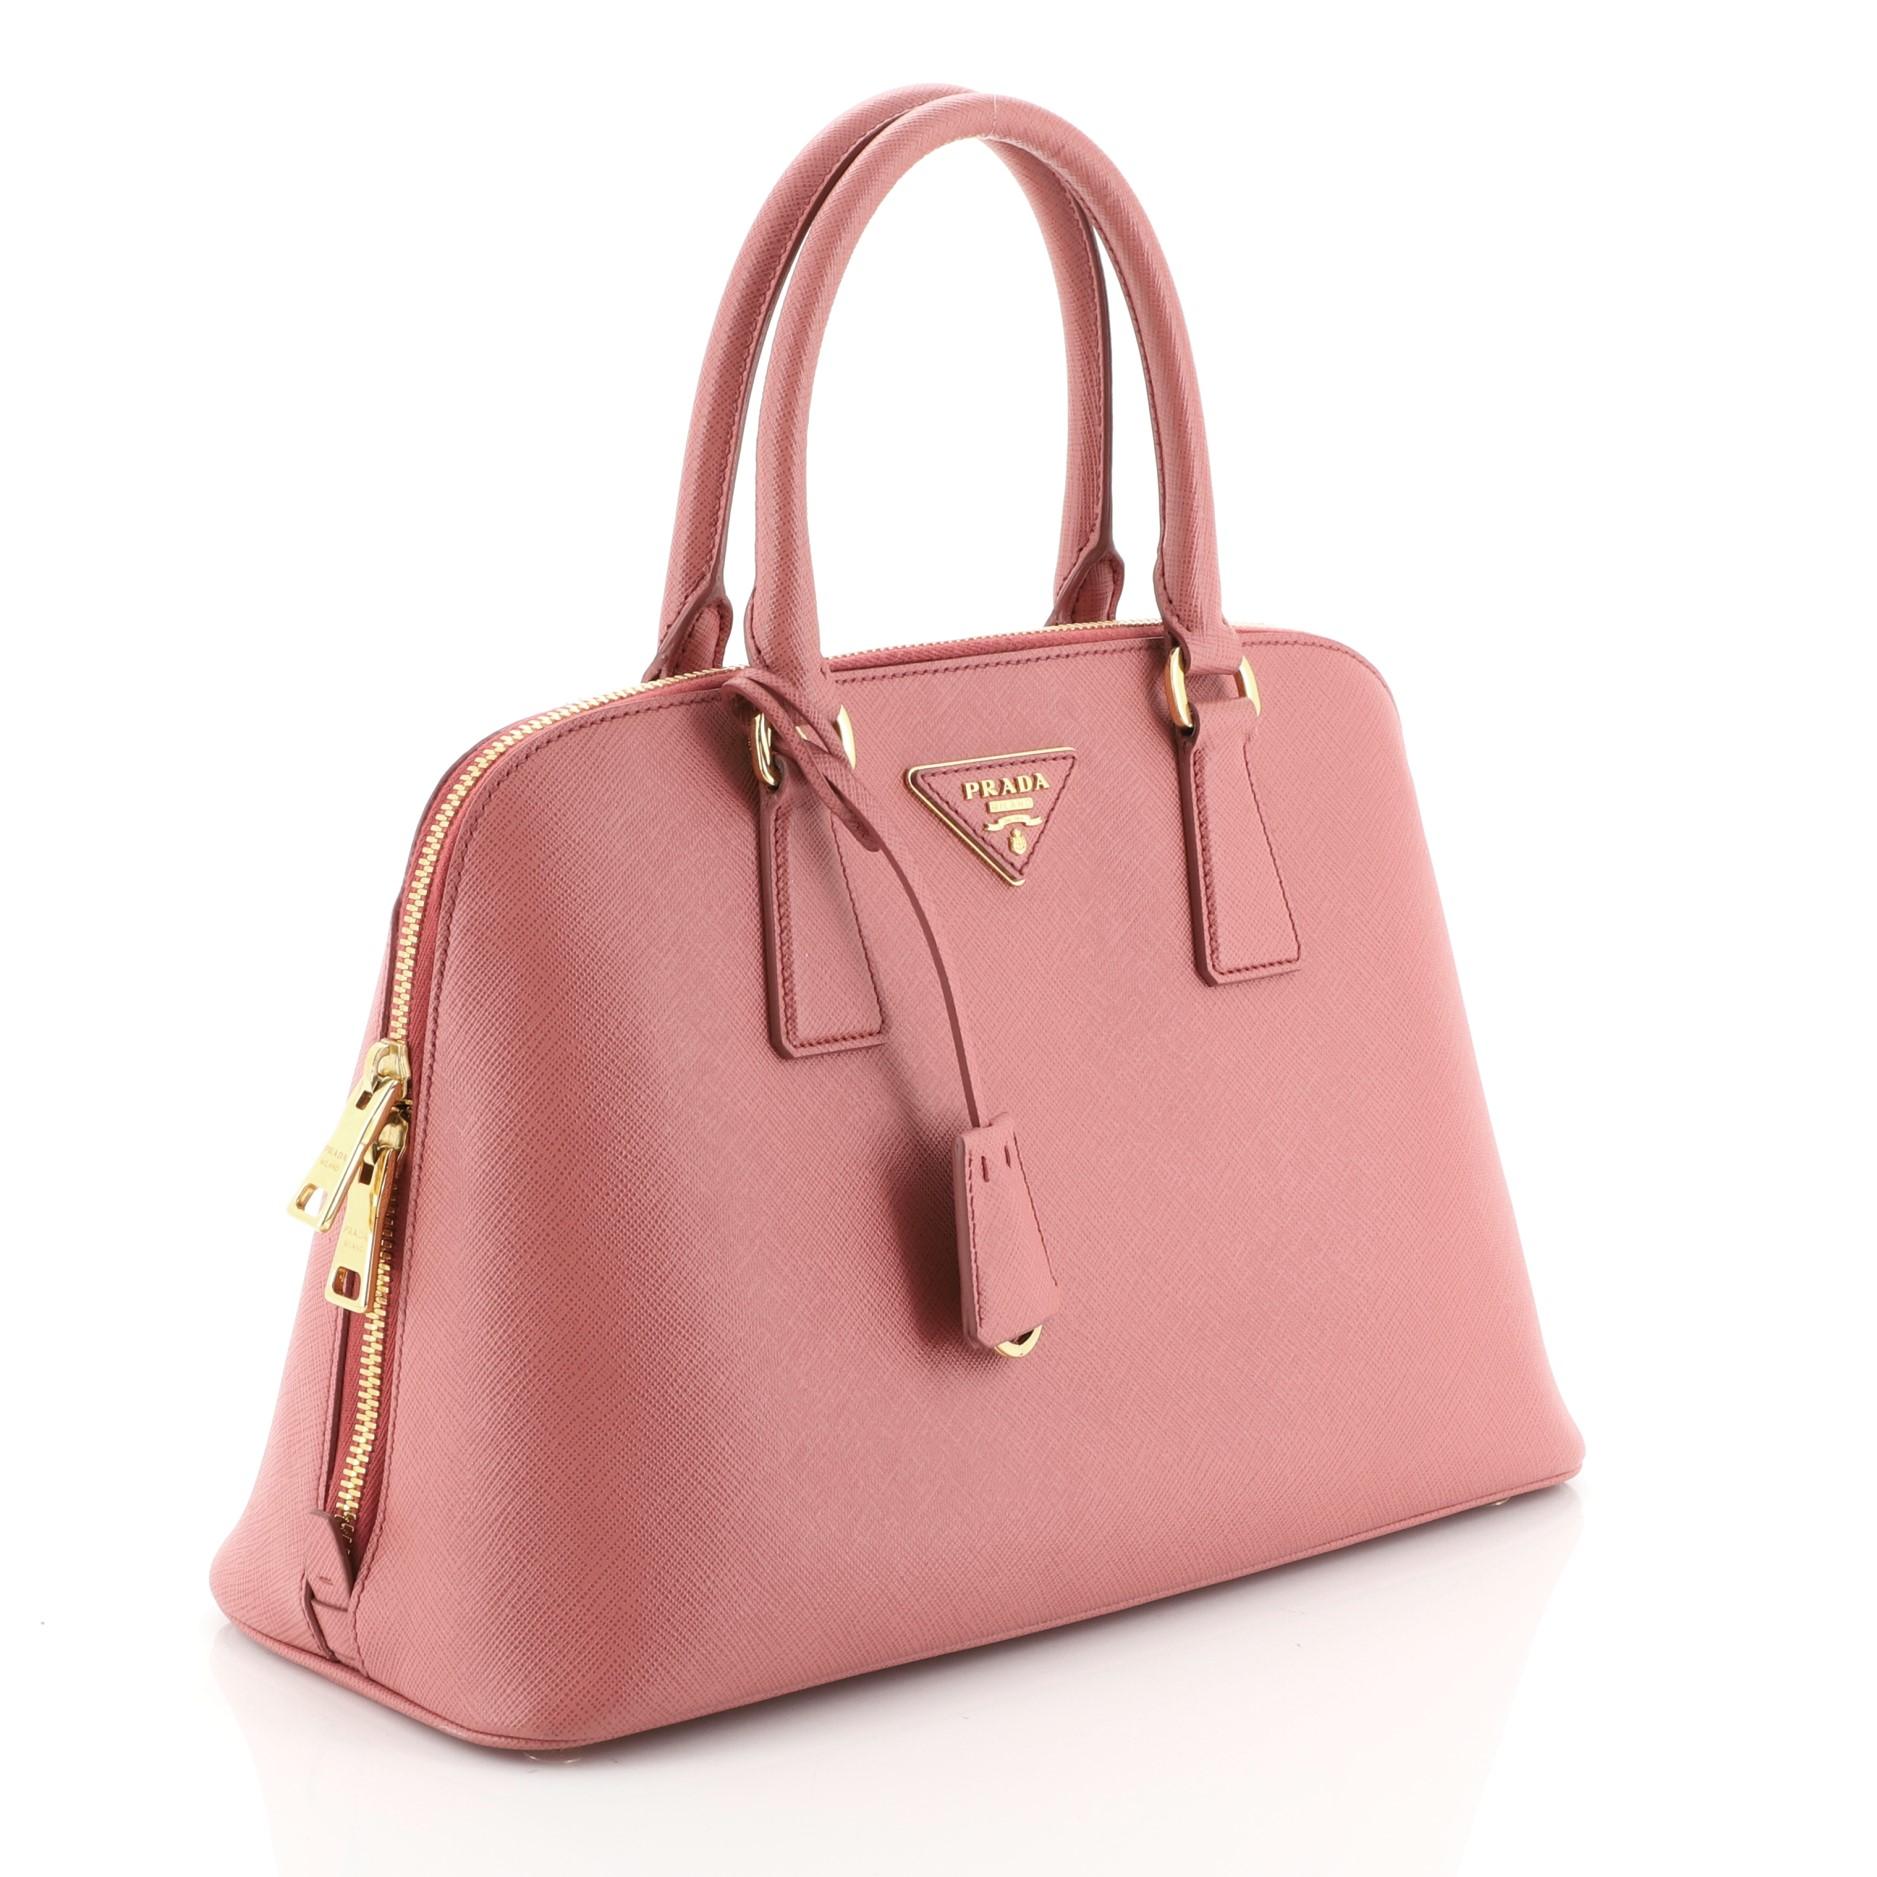 This Prada Promenade Bag Saffiano Leather Medium, crafted from pink saffiano leather, features dual rolled handles, protective base studs and gold-tone hardware. Its zip closure opens to a pink leather and fabric interior divided into two